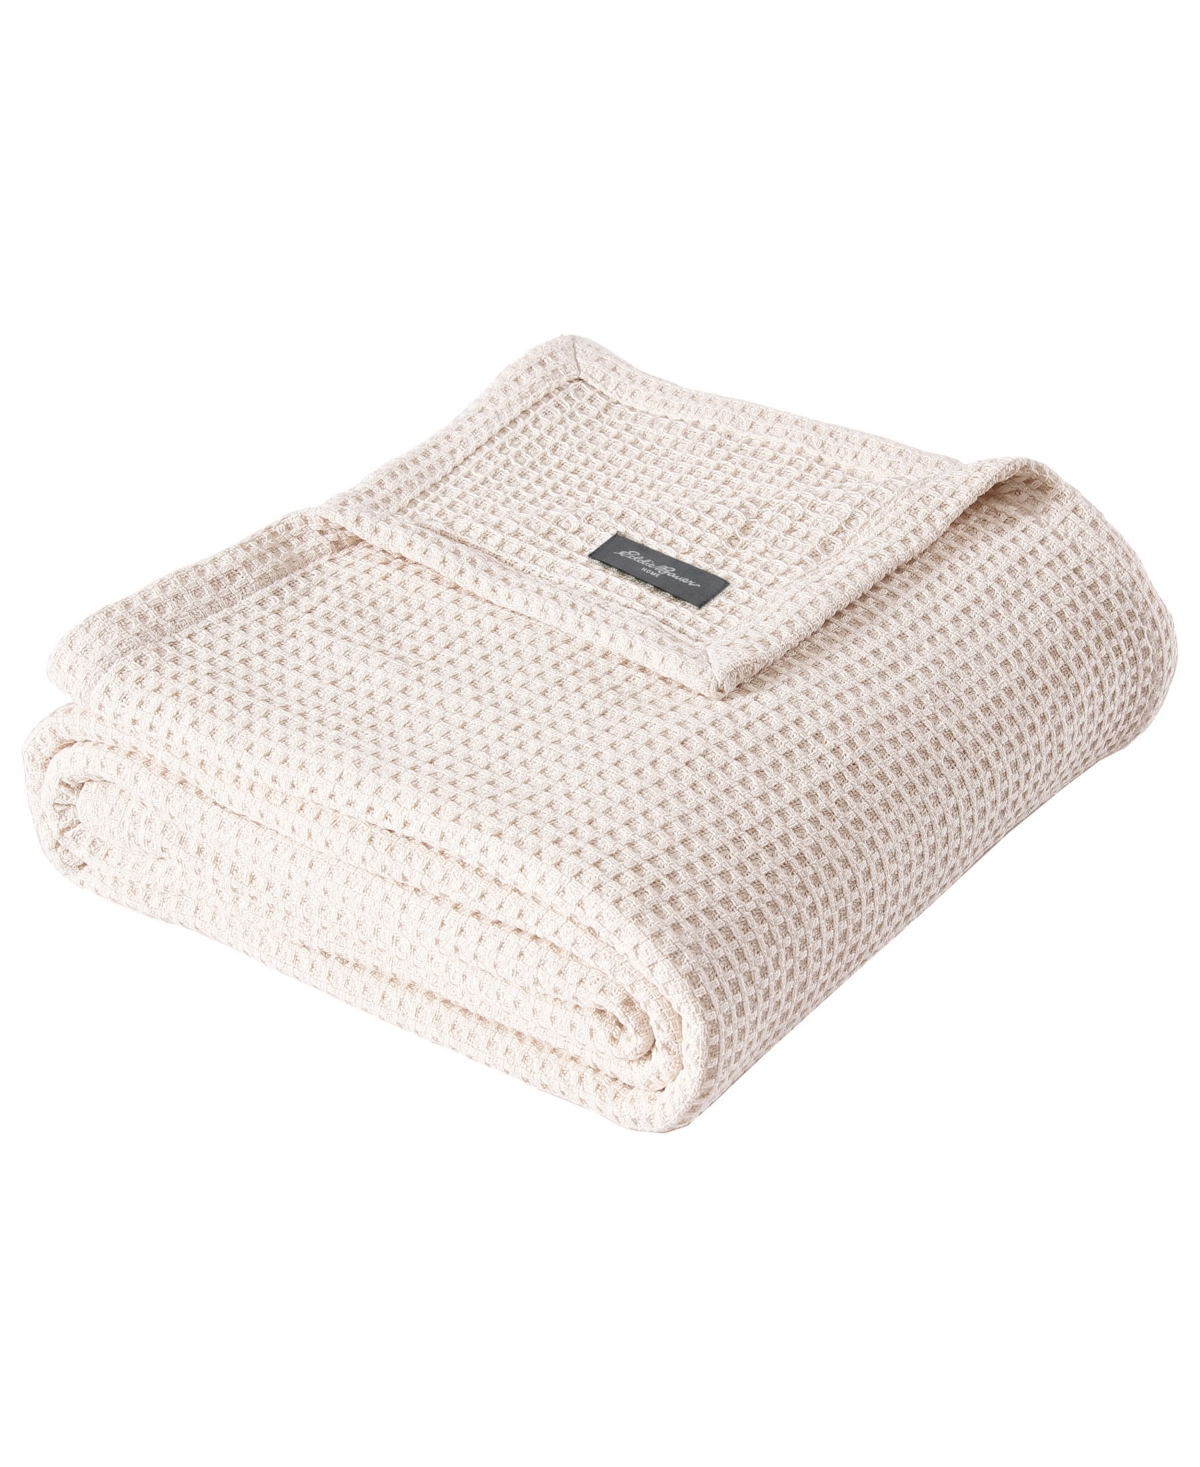 Eddie Bauer Solid Waffle Cotton Reversible Blanket, Full/queen In Winter Ivory White